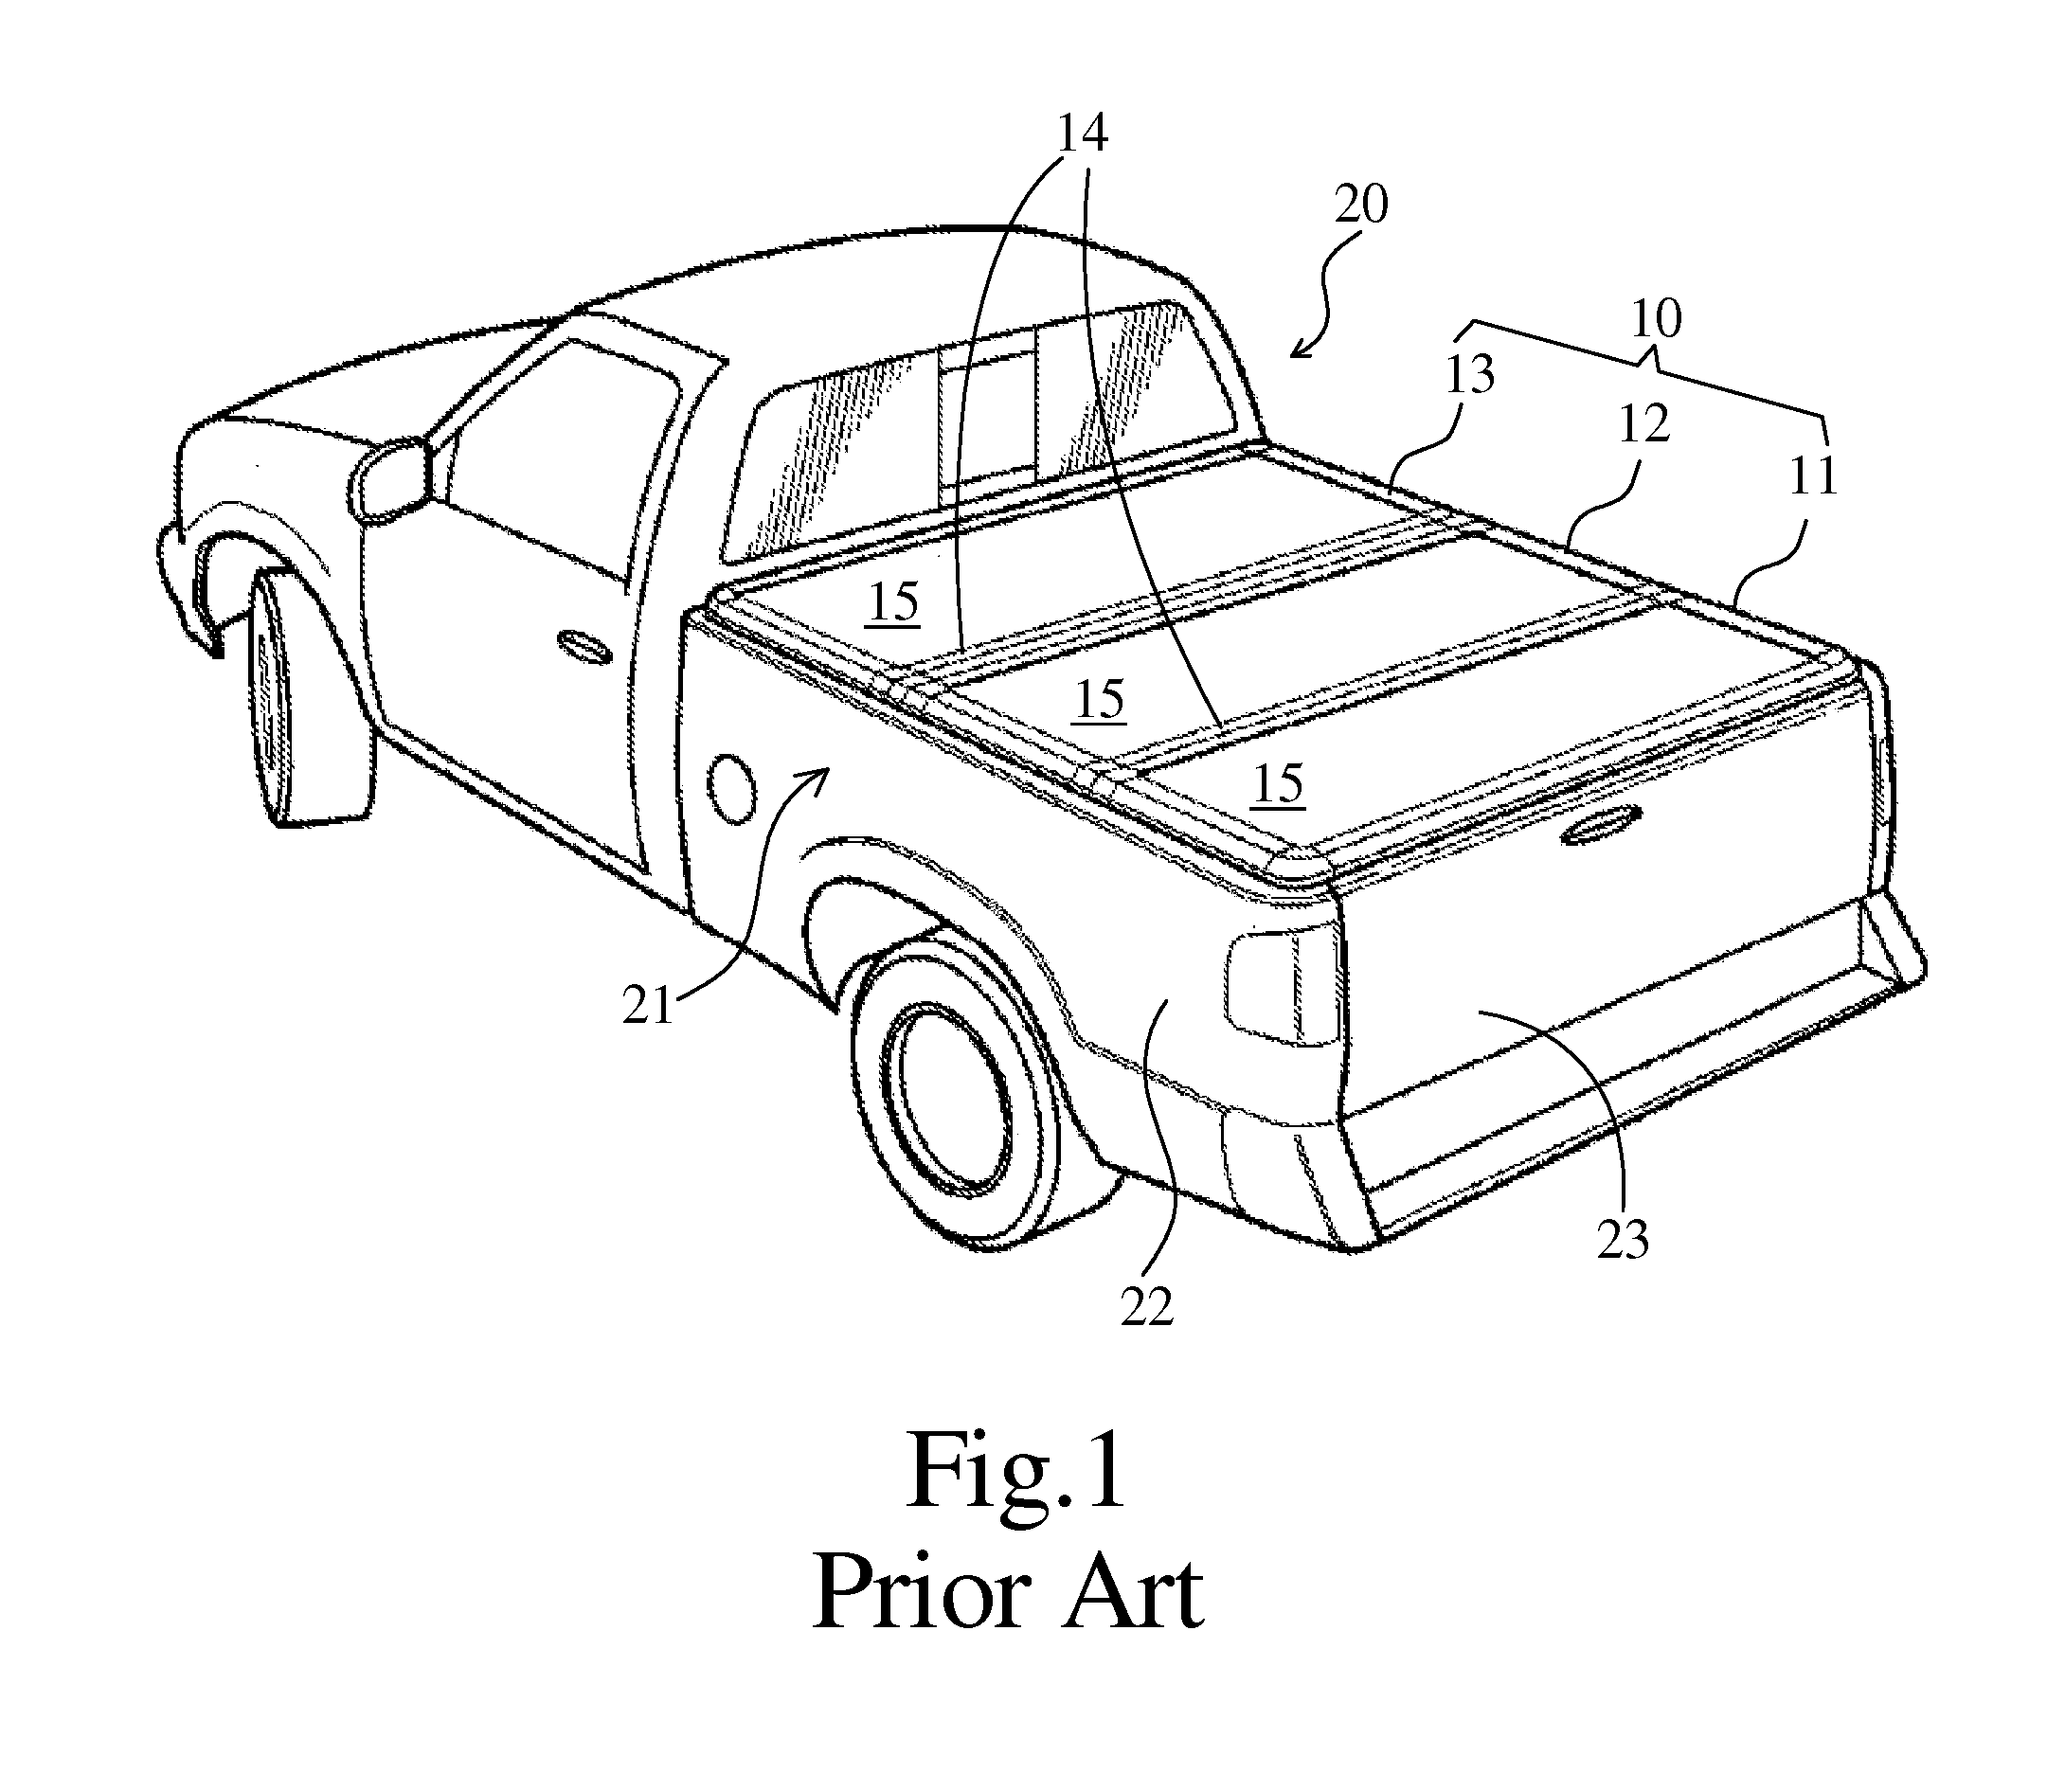 Foldable tonneau cover for pick-up truck and waterproof flexible strip thereof